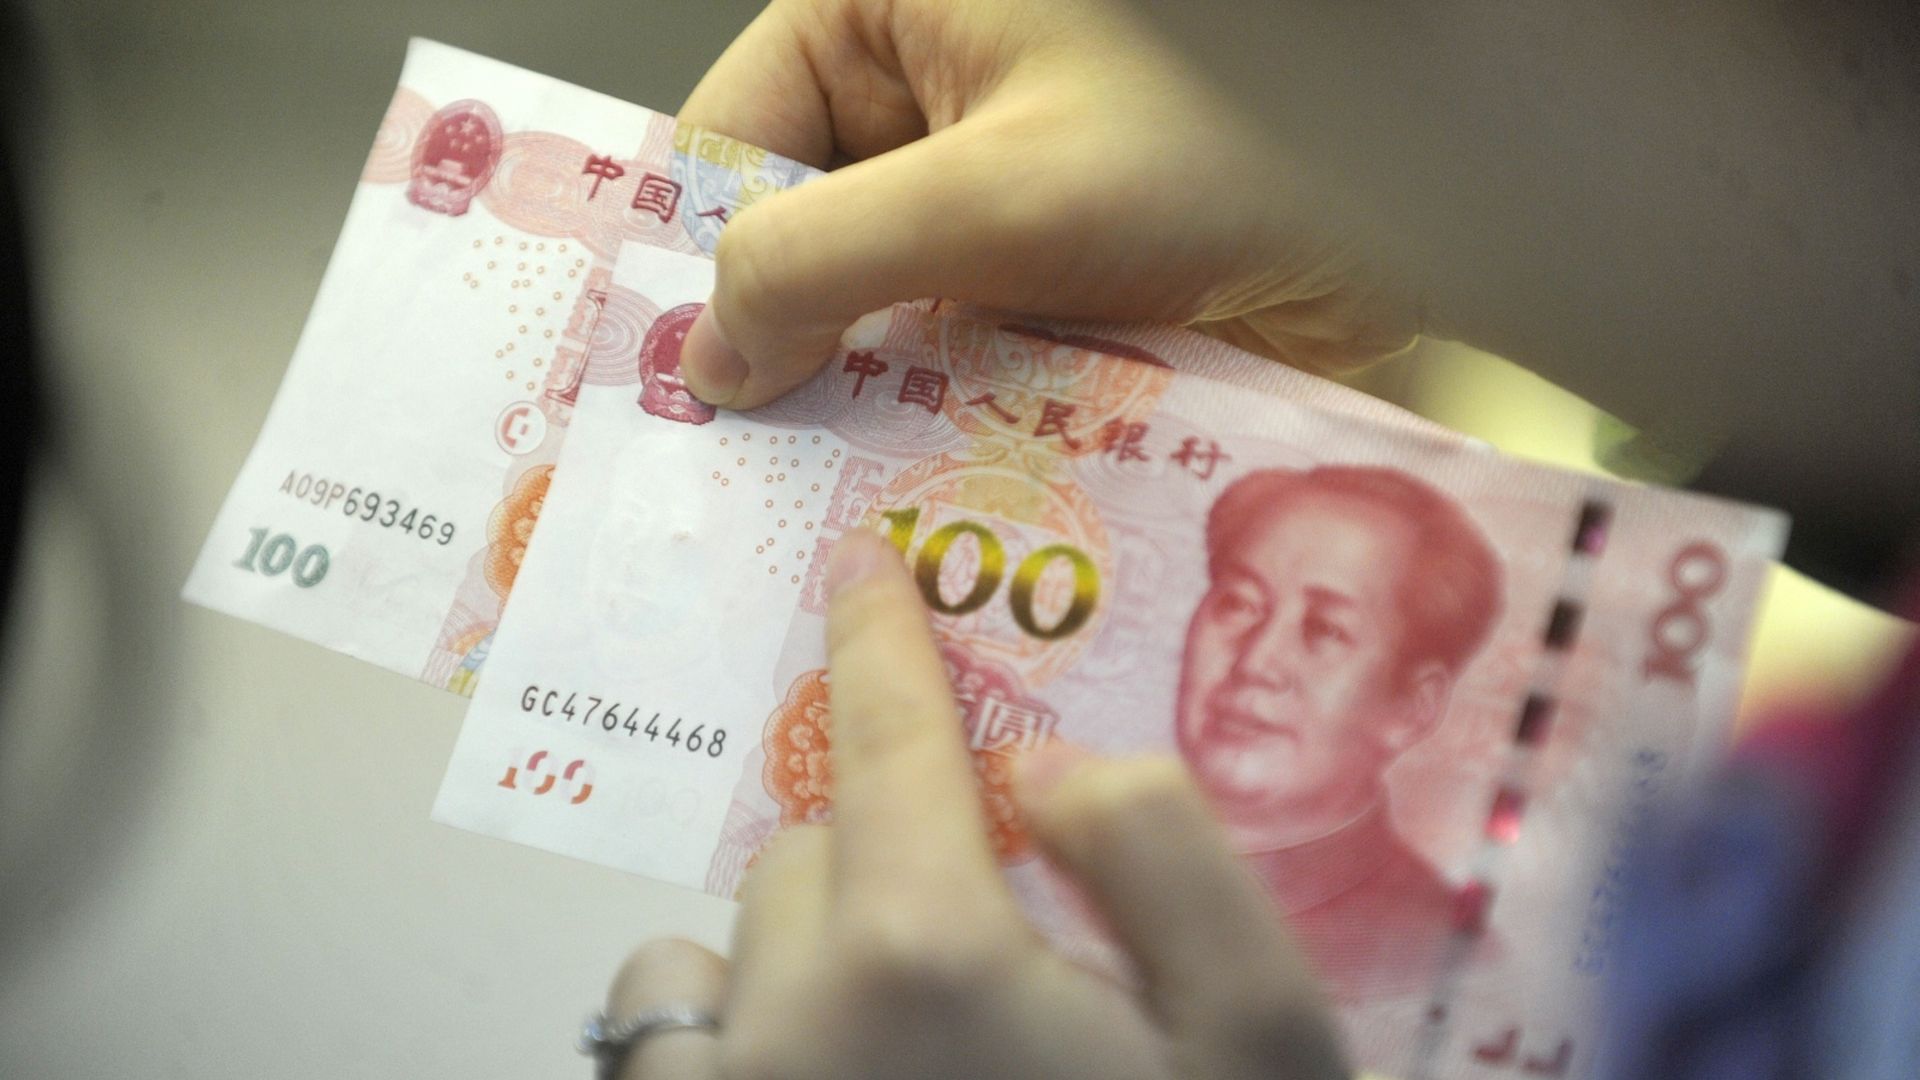 A person holds two 100 yuan notes